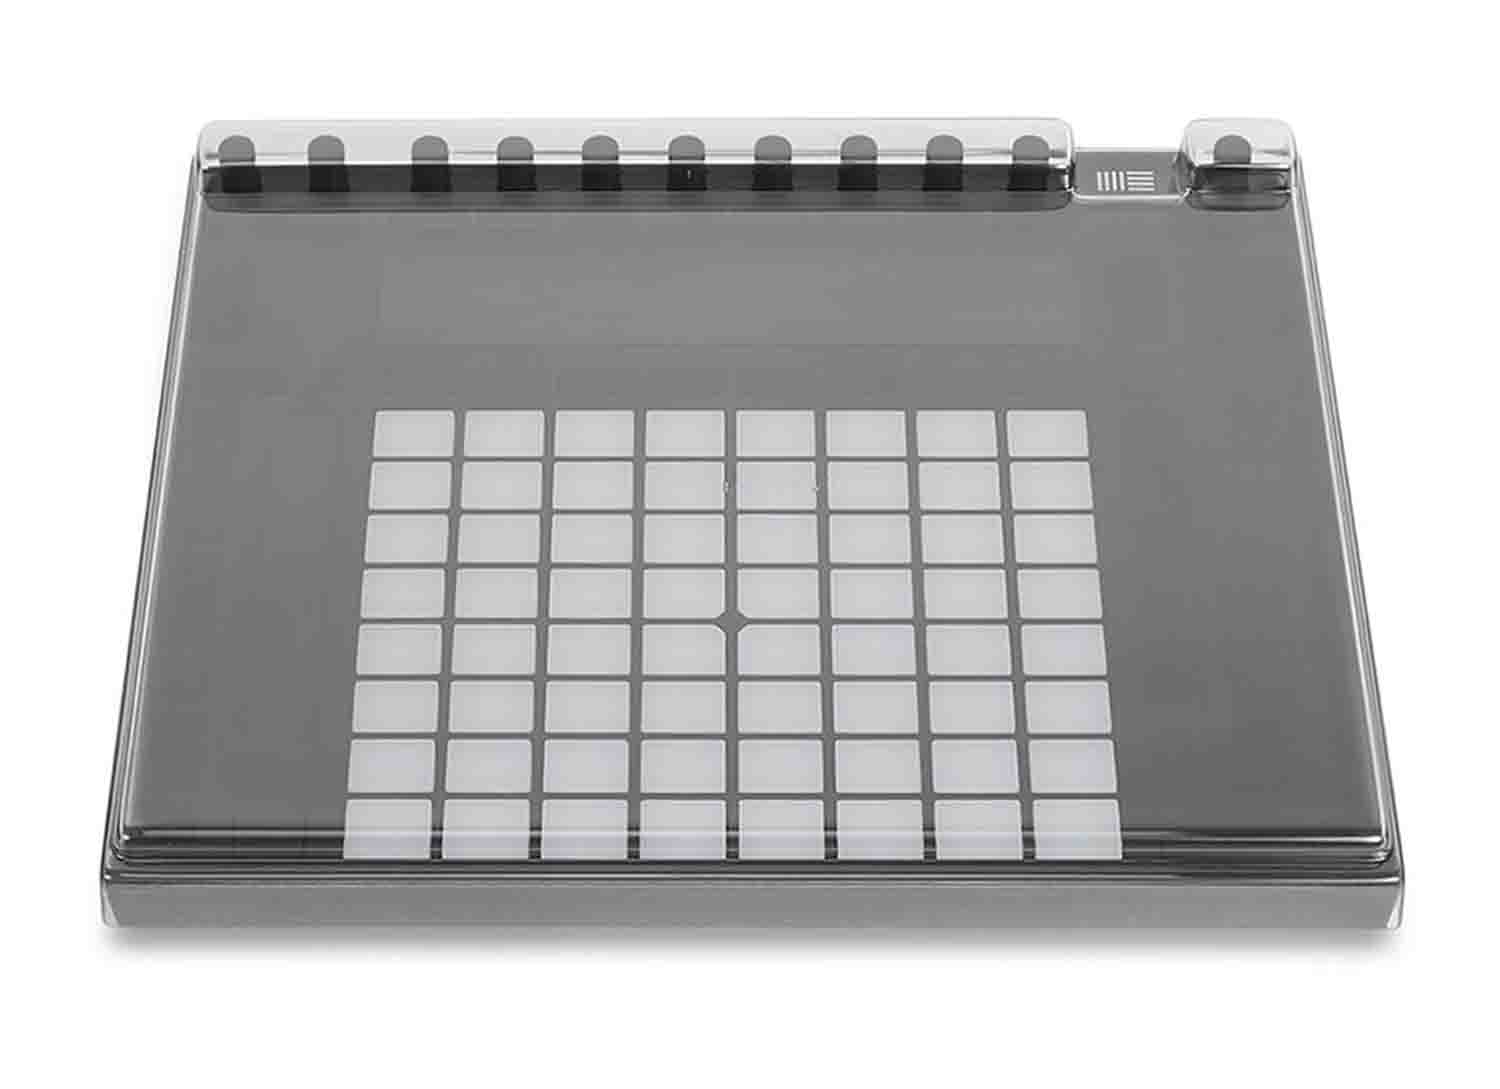 B-Stock: Decksaver DS-PC-APUSH Protection Cover for Ableton Push 2 Controller - Hollywood DJ